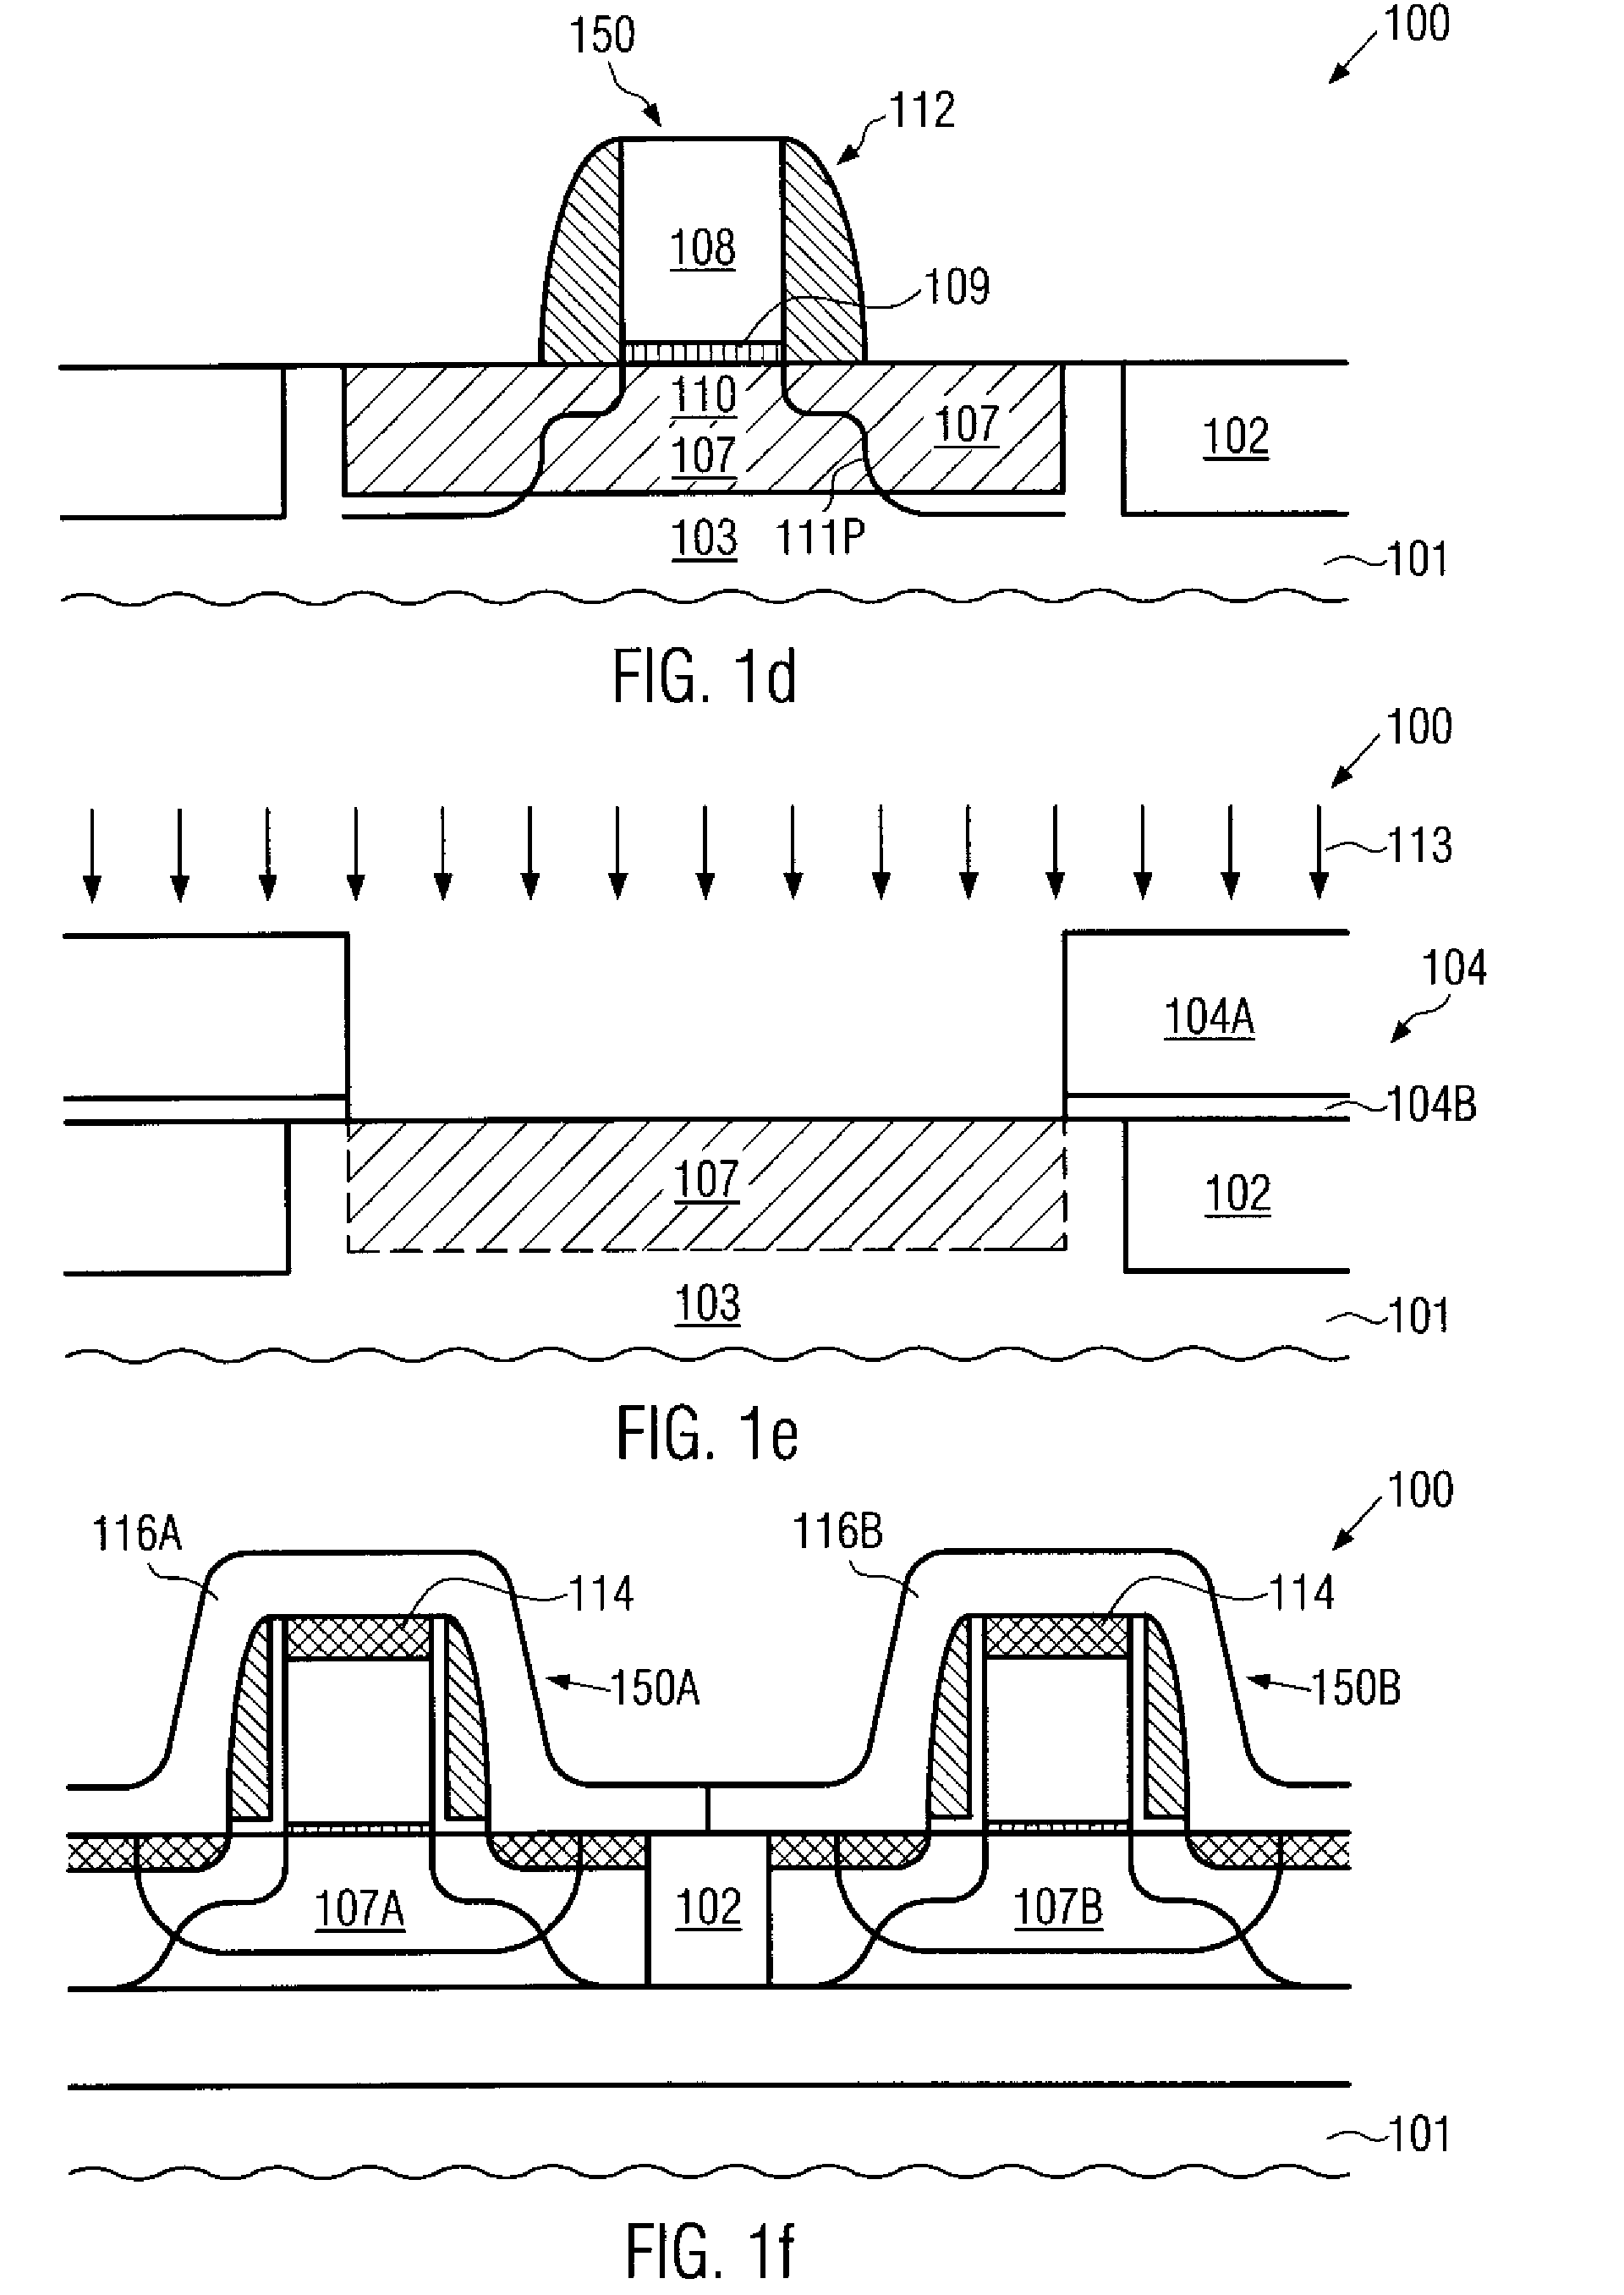 Transistor having a strained channel region including a performance enhancing material composition